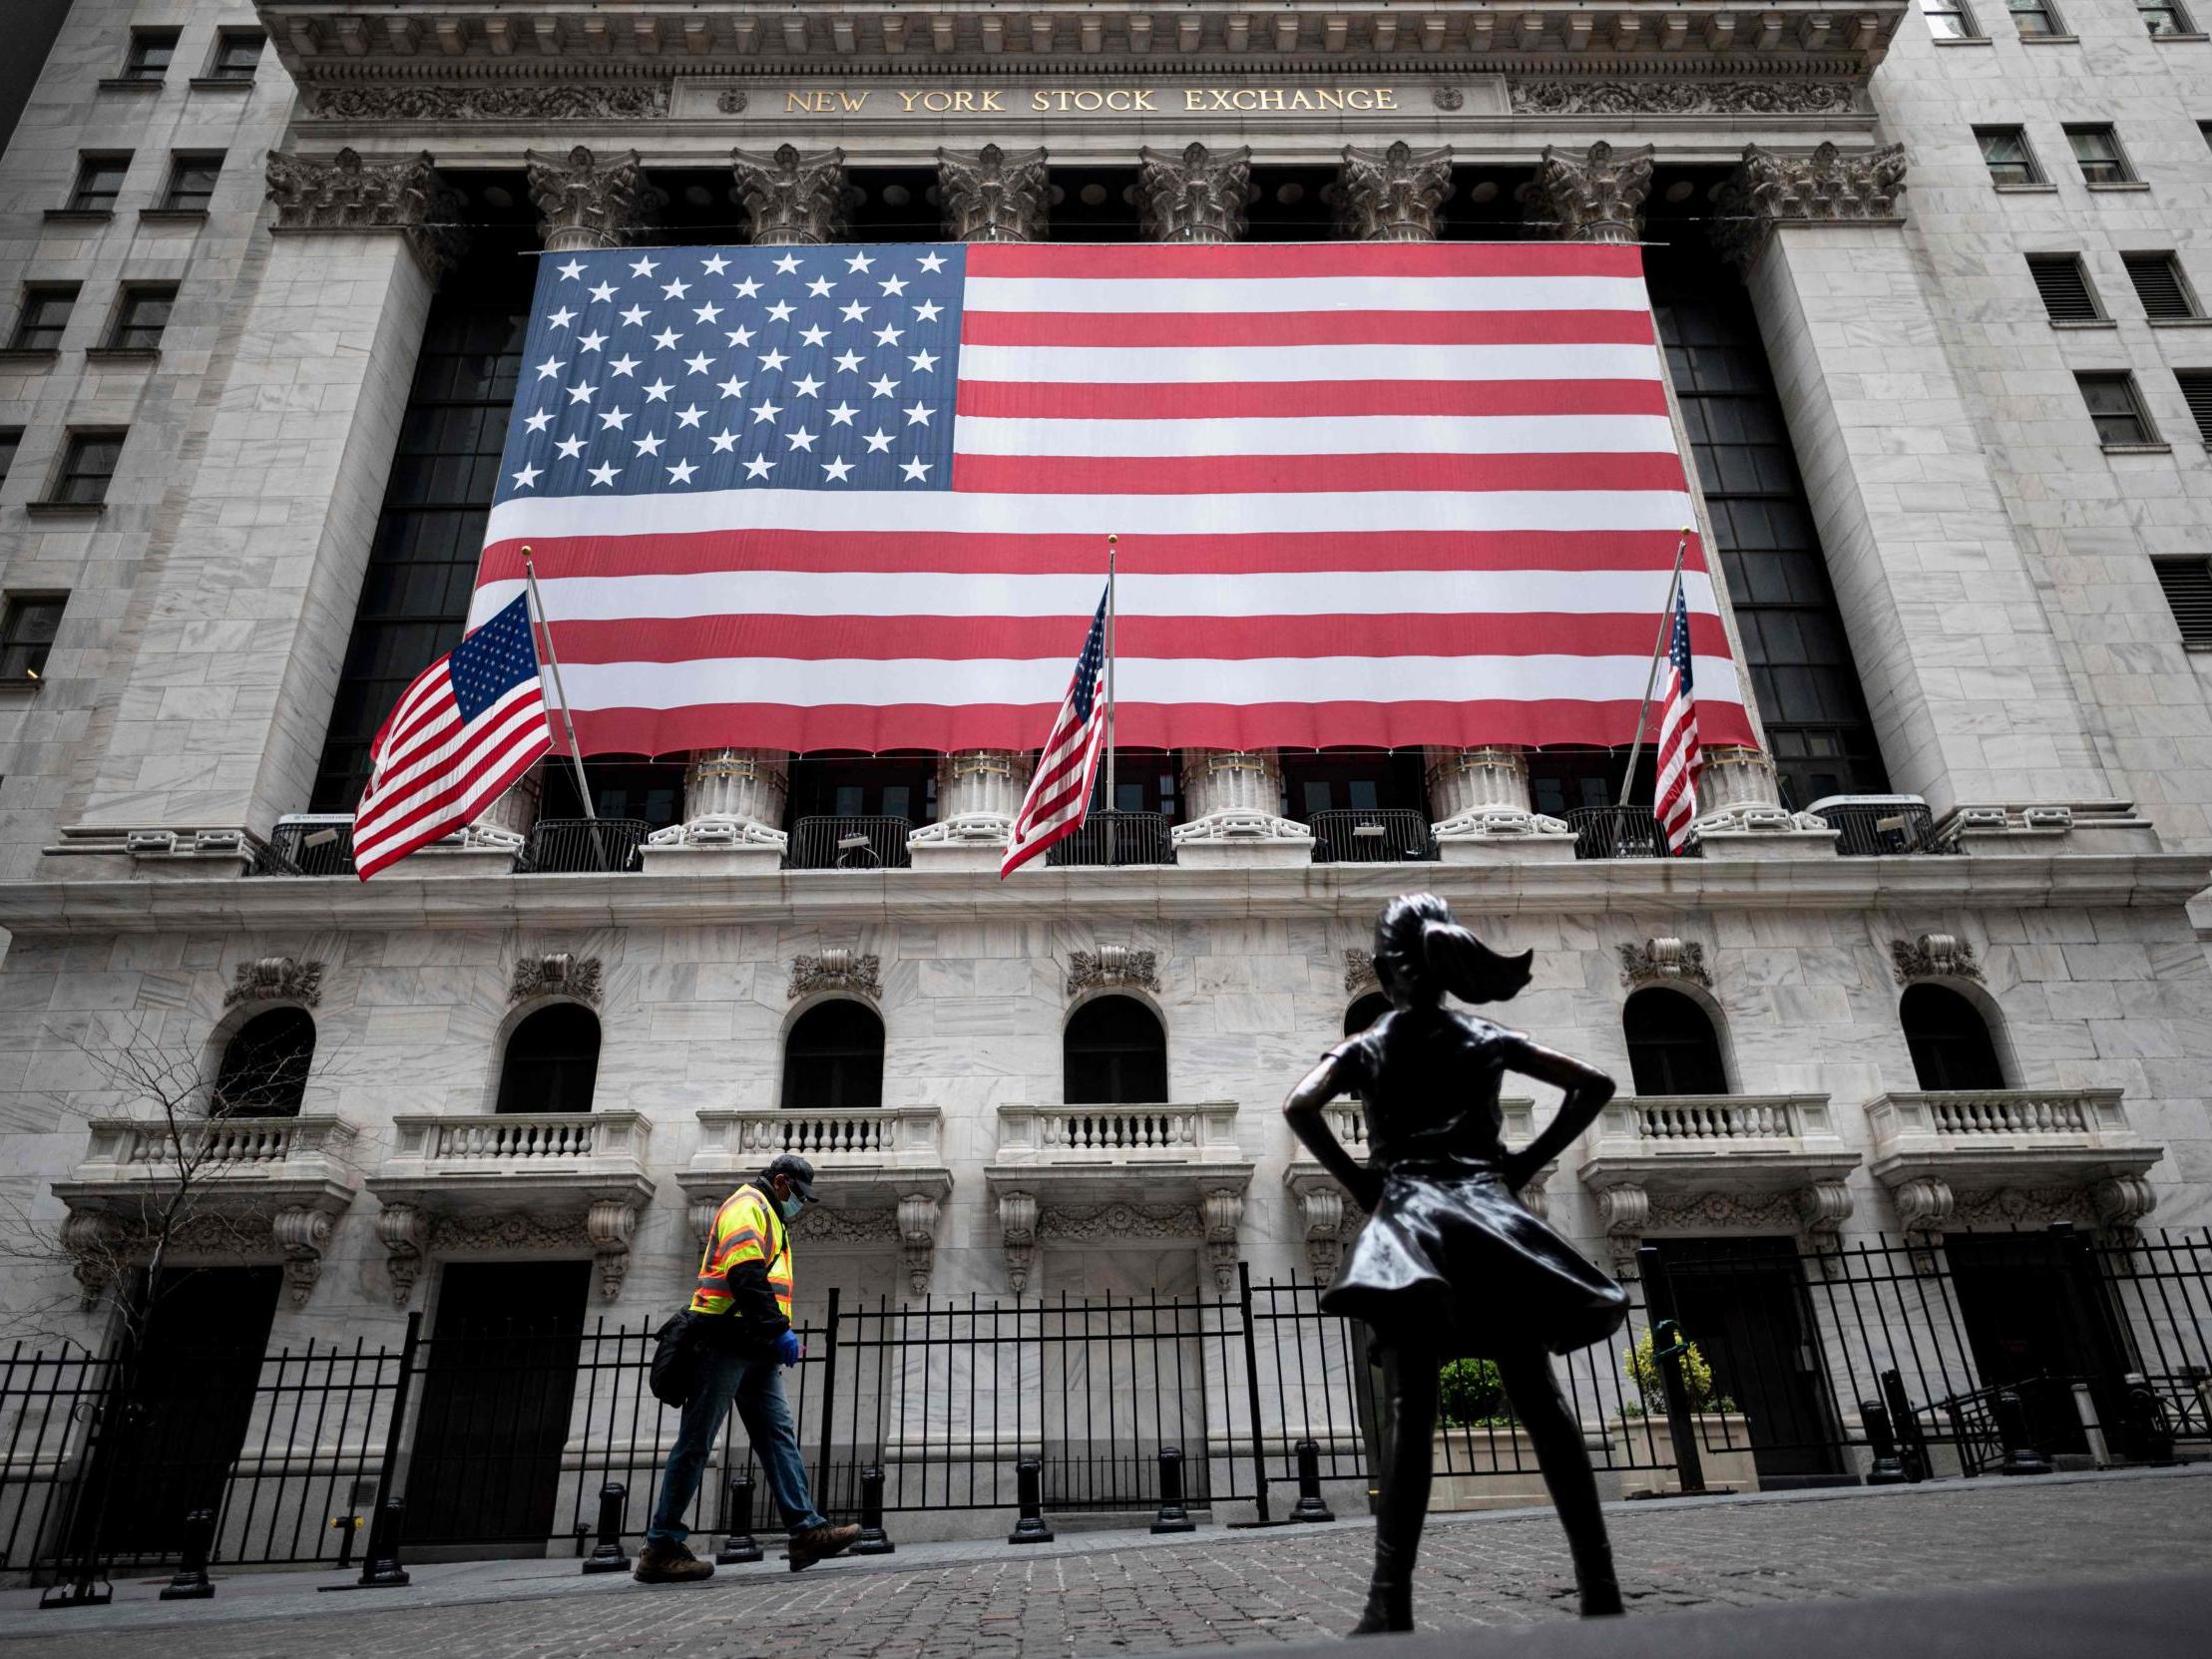 Wall Street has seen much of the early economic recovery